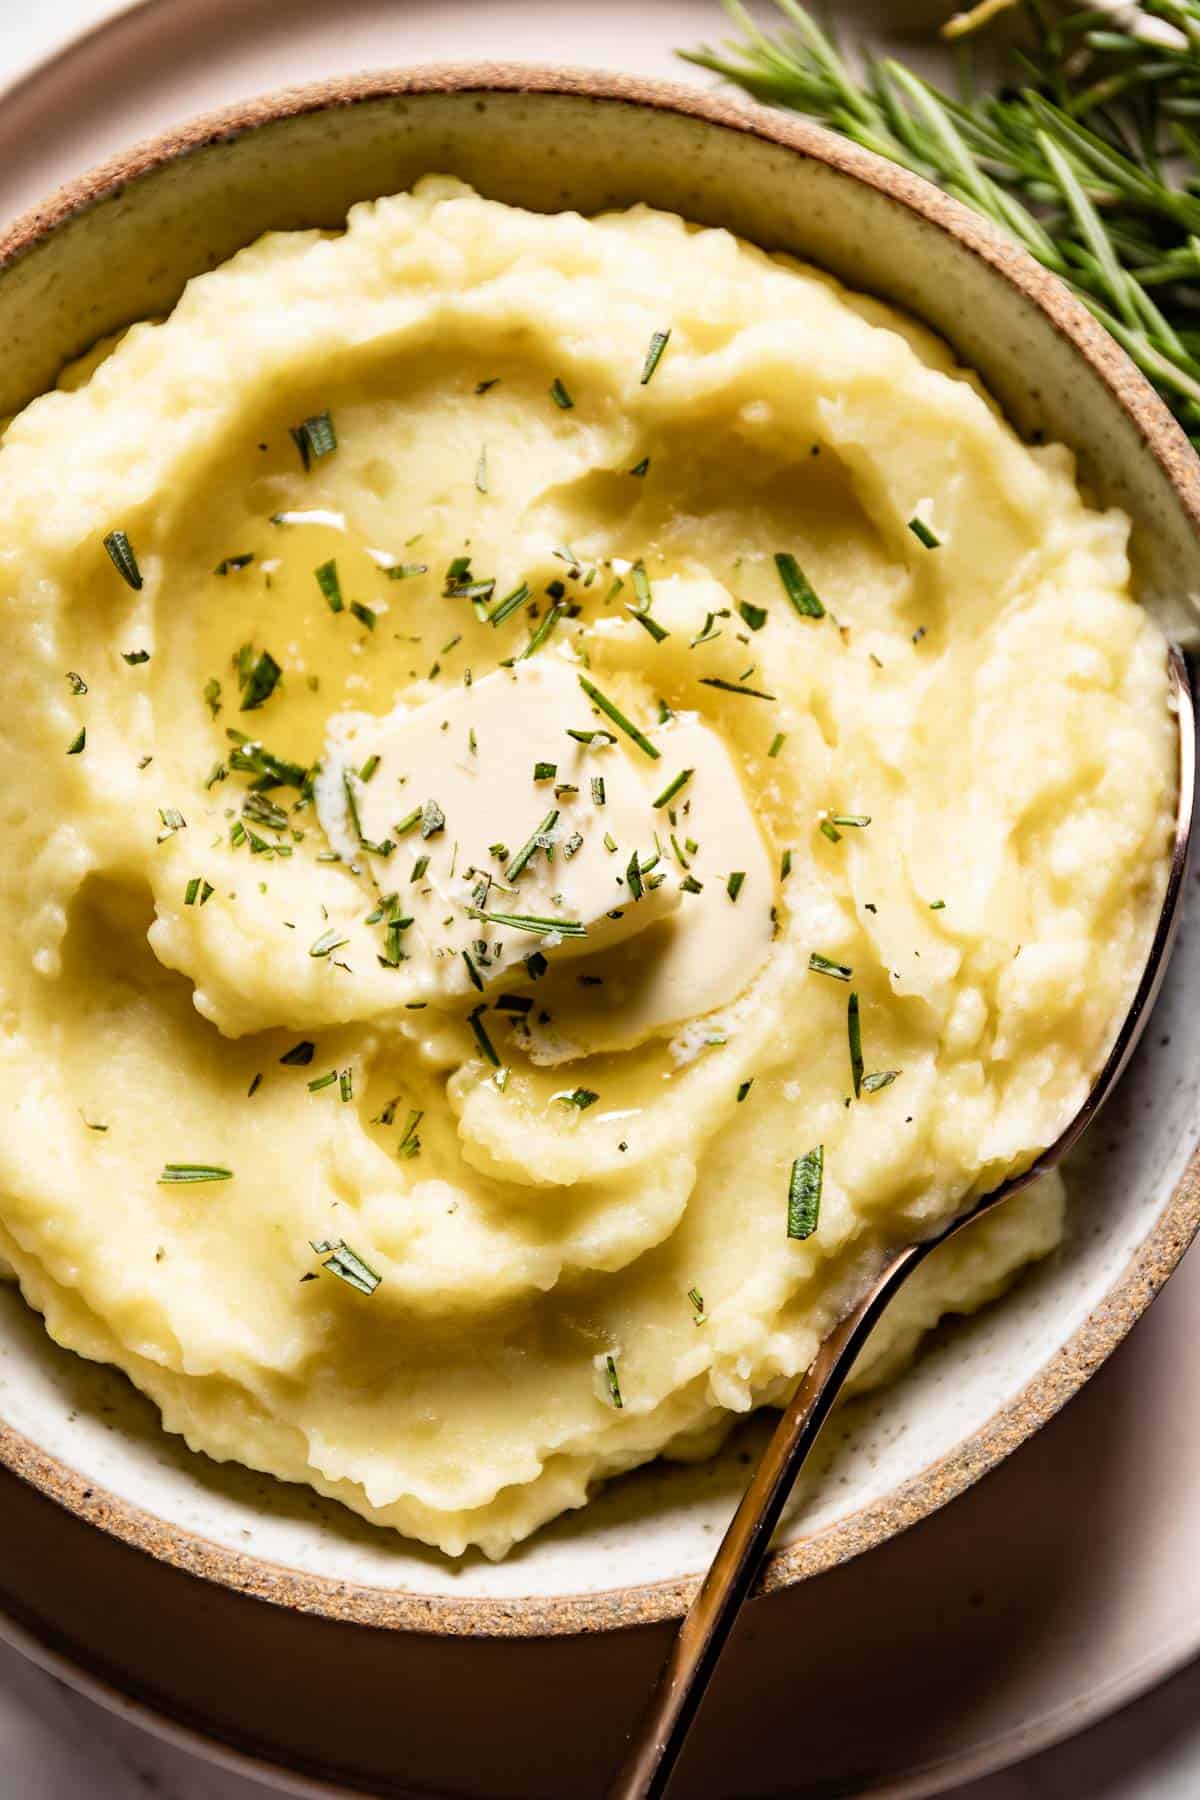 A bowl of mashed potatoes as one of the pot roast side dishes.